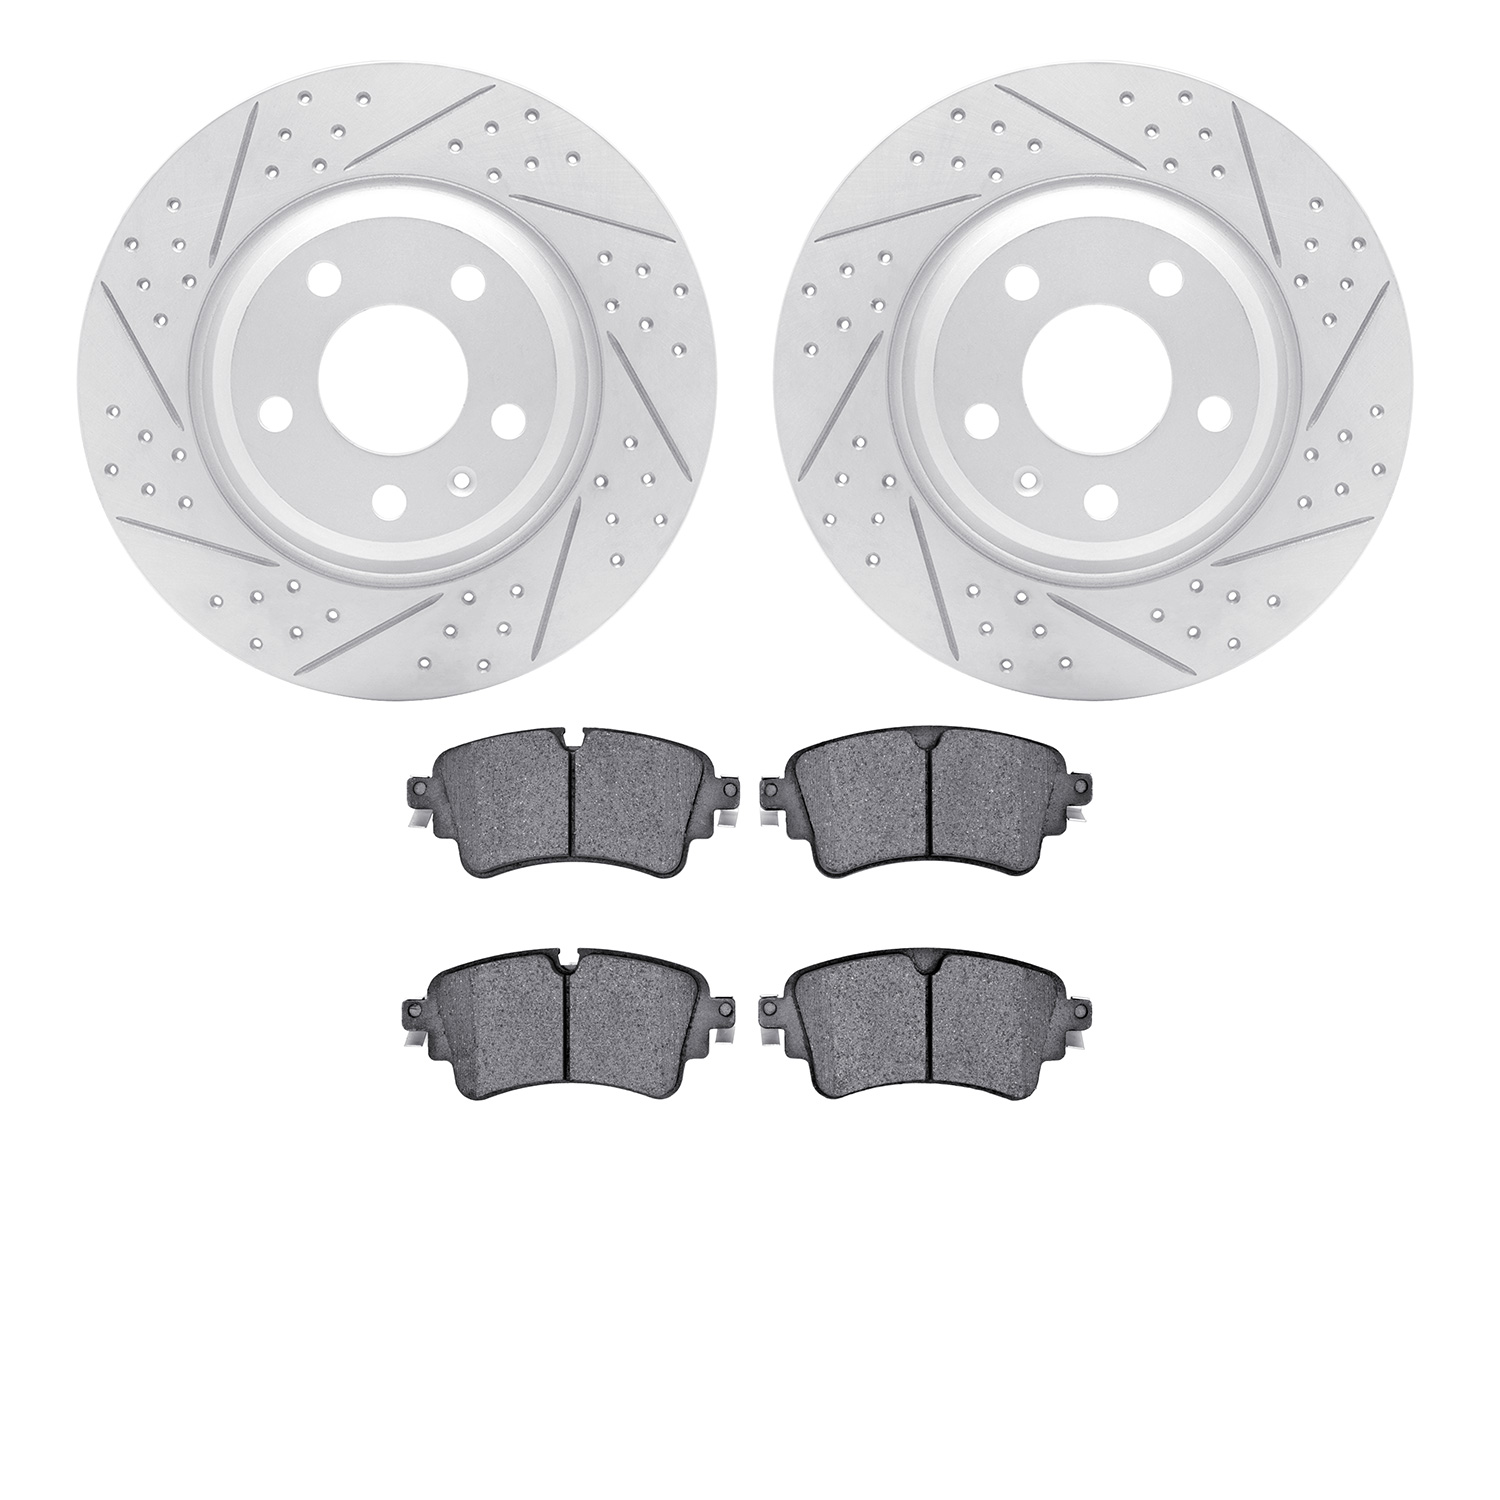 2502-73059 Geoperformance Drilled/Slotted Rotors w/5000 Advanced Brake Pads Kit, 2016-2020 Audi/Volkswagen, Position: Rear